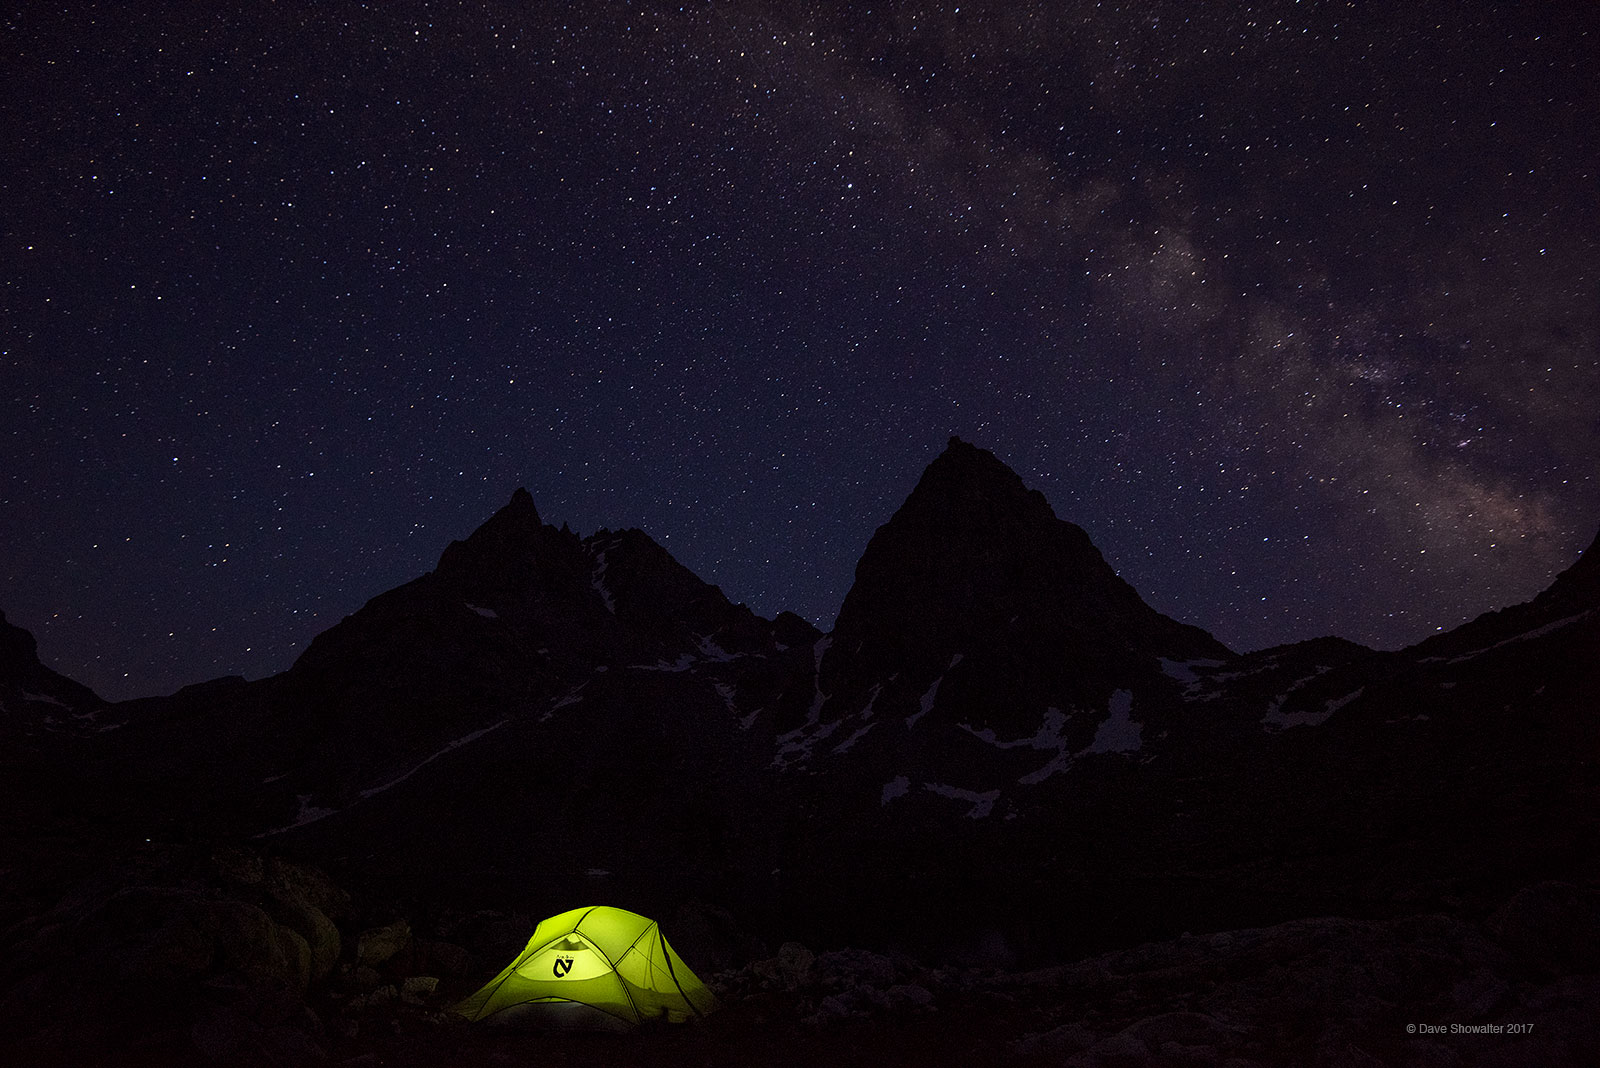 As darkness descends the milky way appears over Stroud and Sulphur Peaks from our tent site on Peak Lake, high in the Wind River...